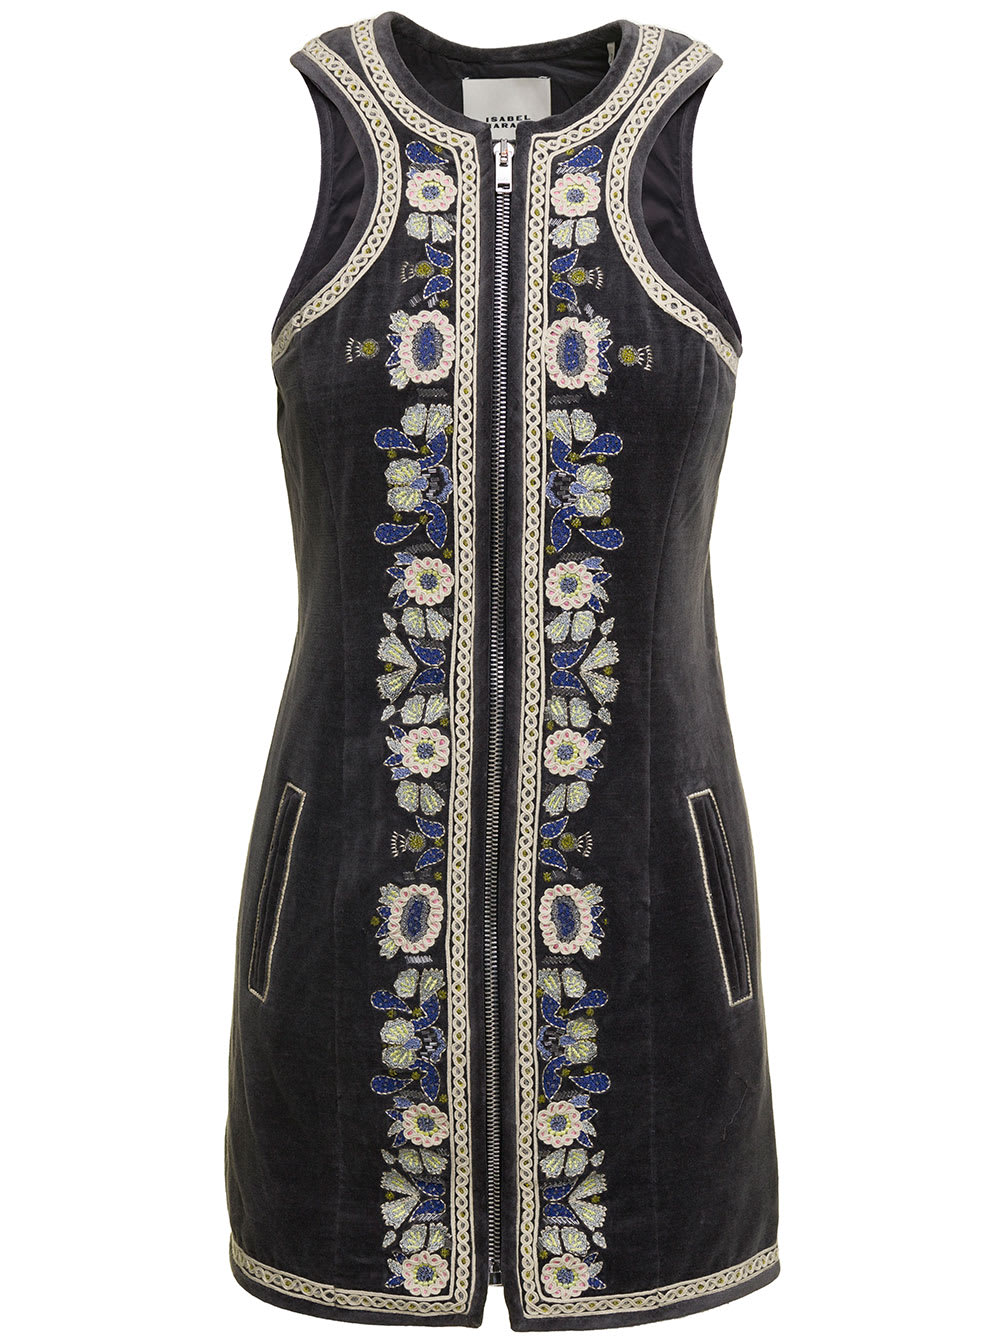 ISABEL MARANT BELILA MINI DARK GREY SLEEVELESS DRESS WITH EMBROIDERIES IN COTTON WOMAN